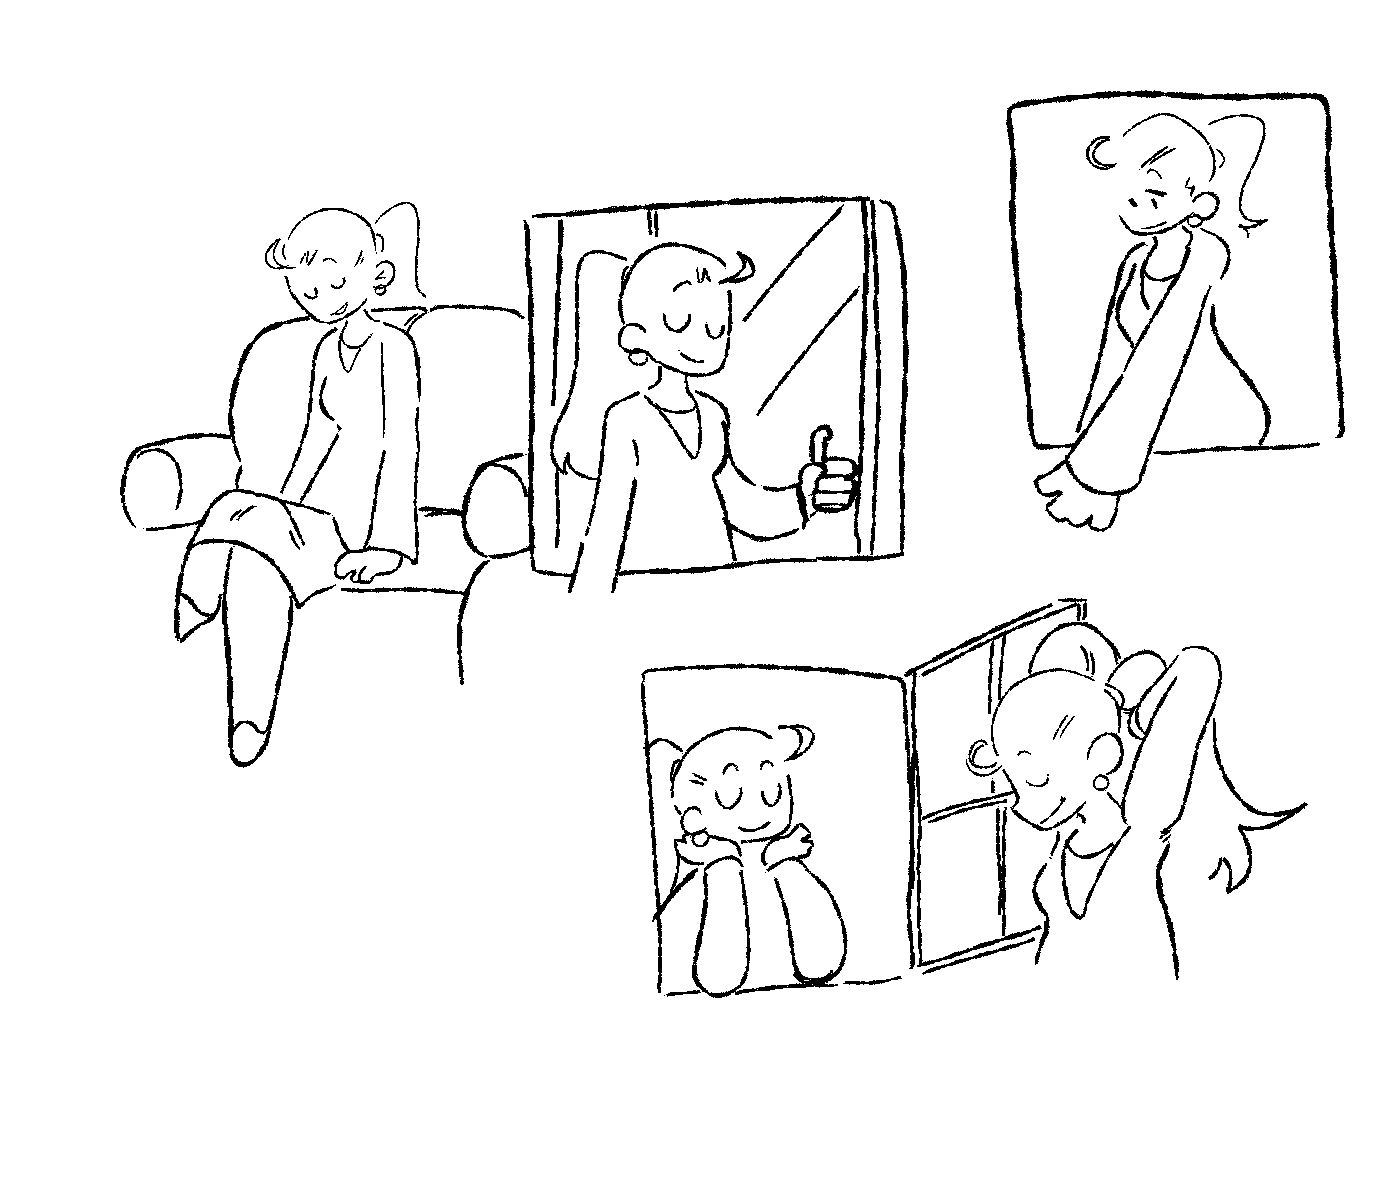 Various concept sketches of Rachel from Commonplace performing various casual actions, like sitting on a sofa and opening a door.